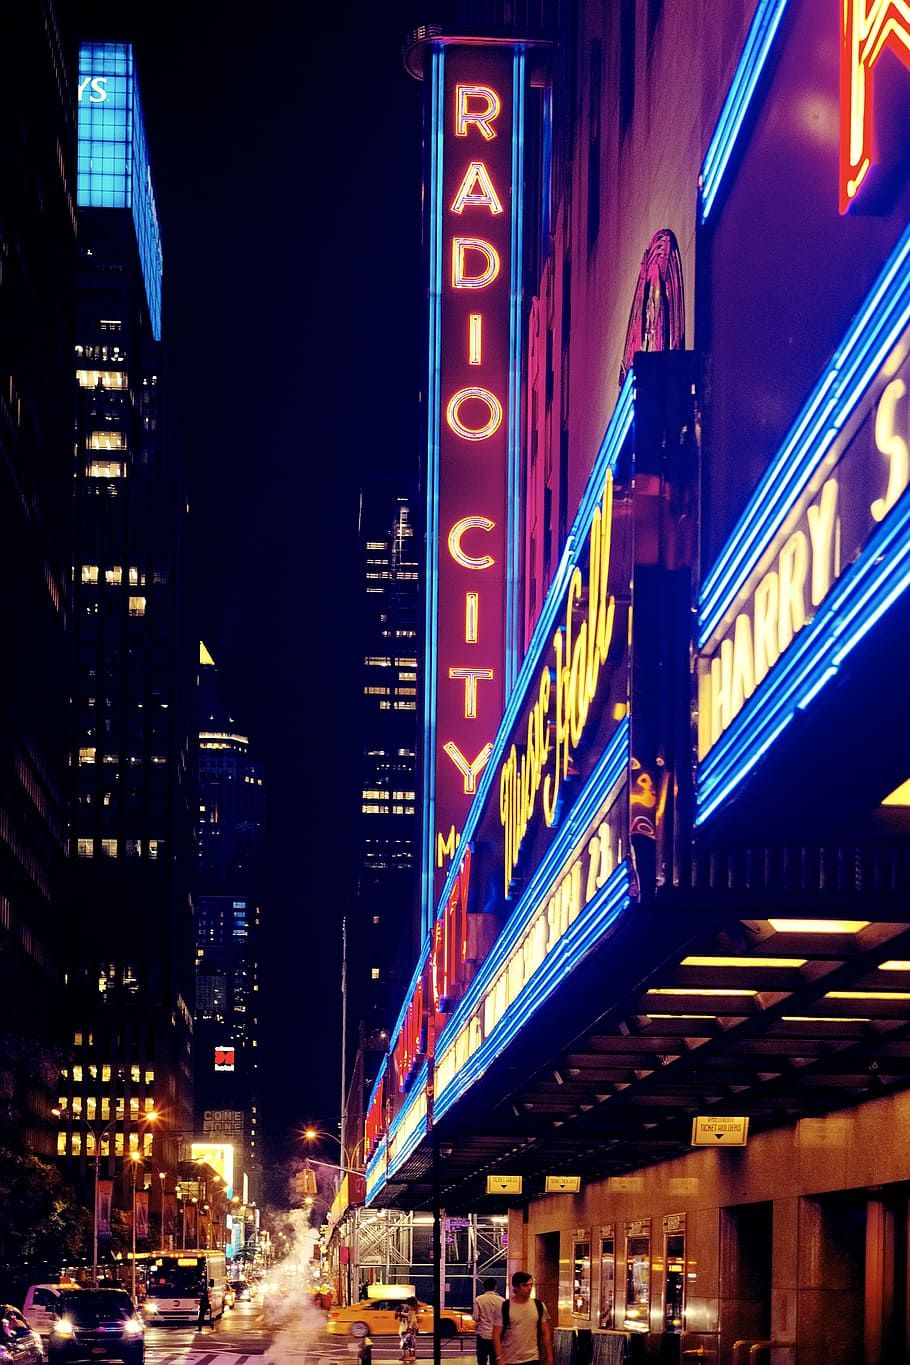 inlighted Radio City signage, high-rise building with lights